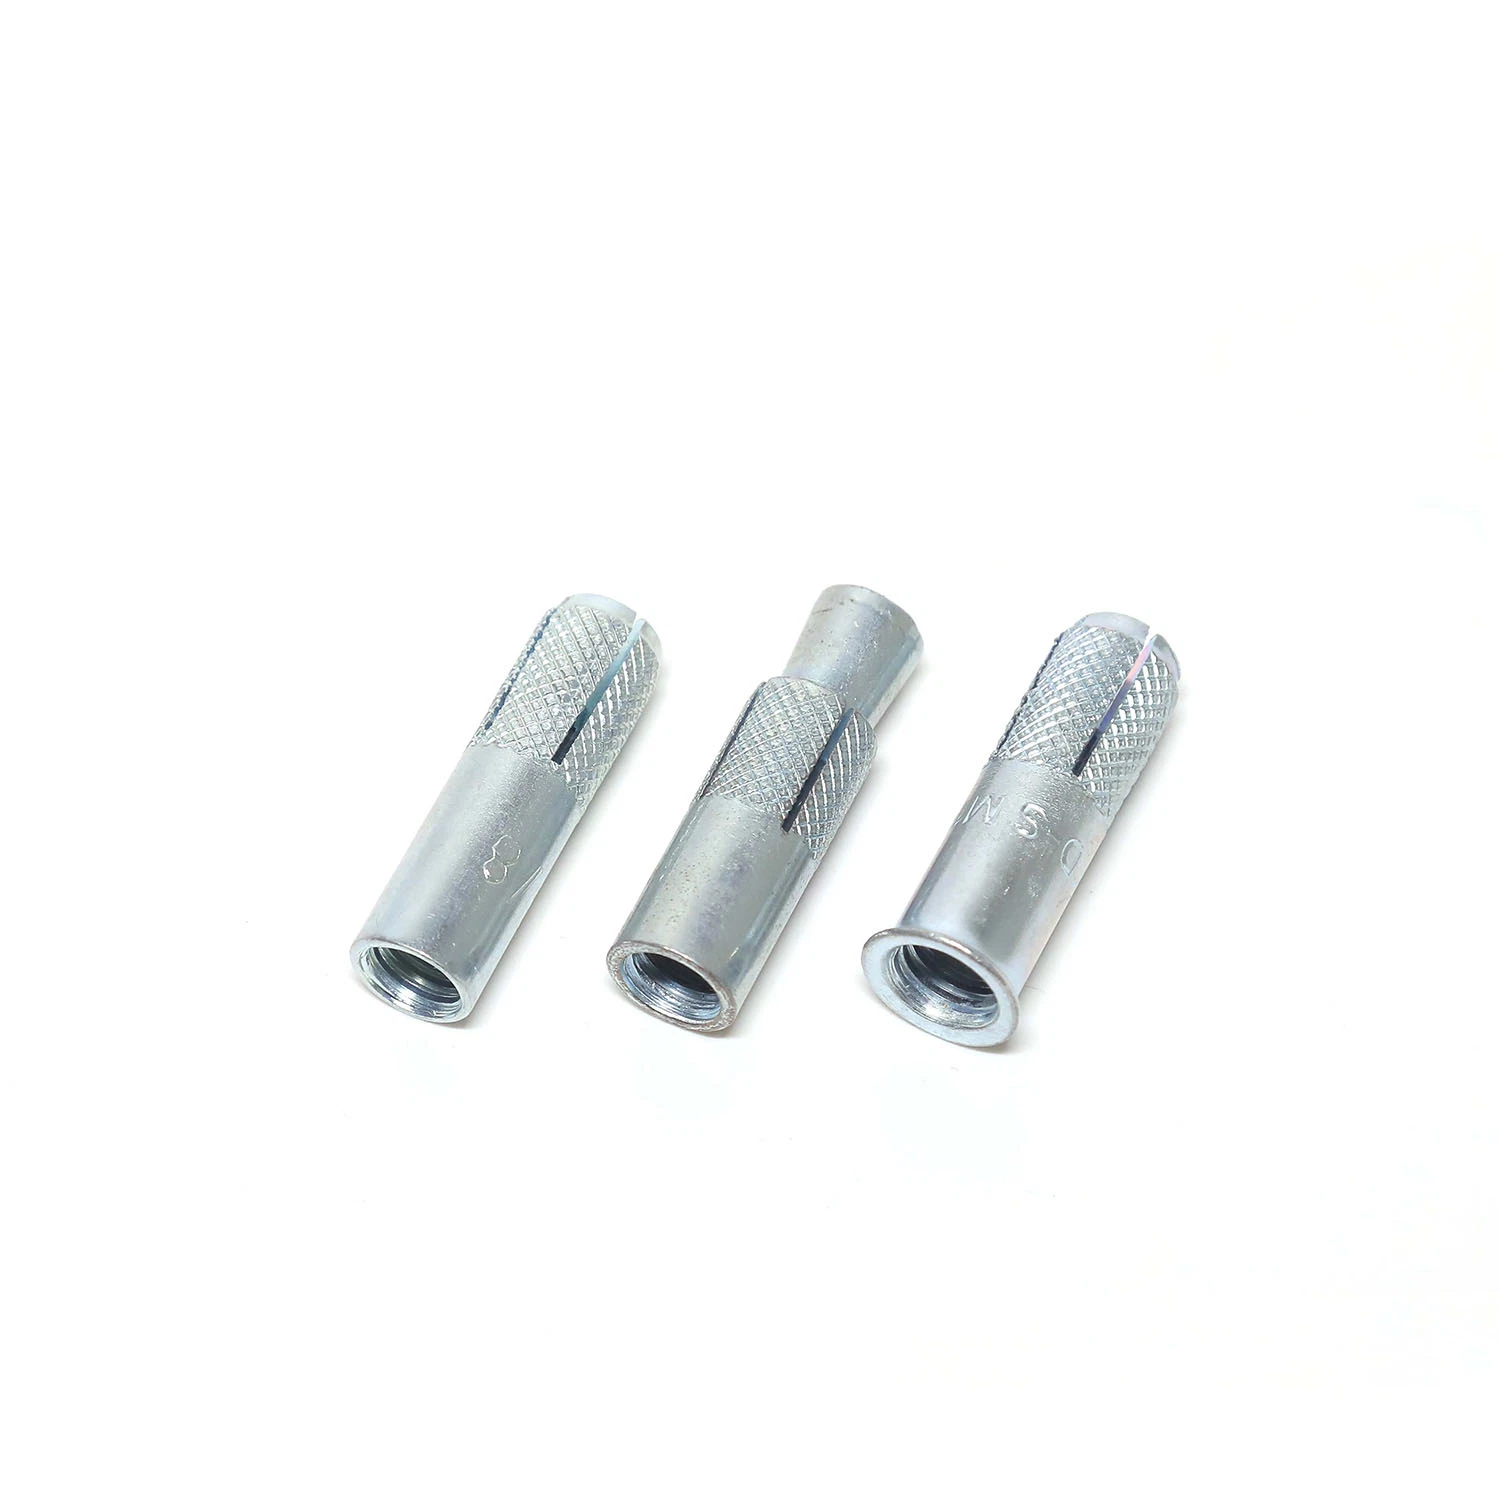 1/4" SS304 316 Carbon Steel Grade 4.8 8.8 Concrete Female Expansion Stone Drop in Anchors with Setting Tool for Reasonable Price